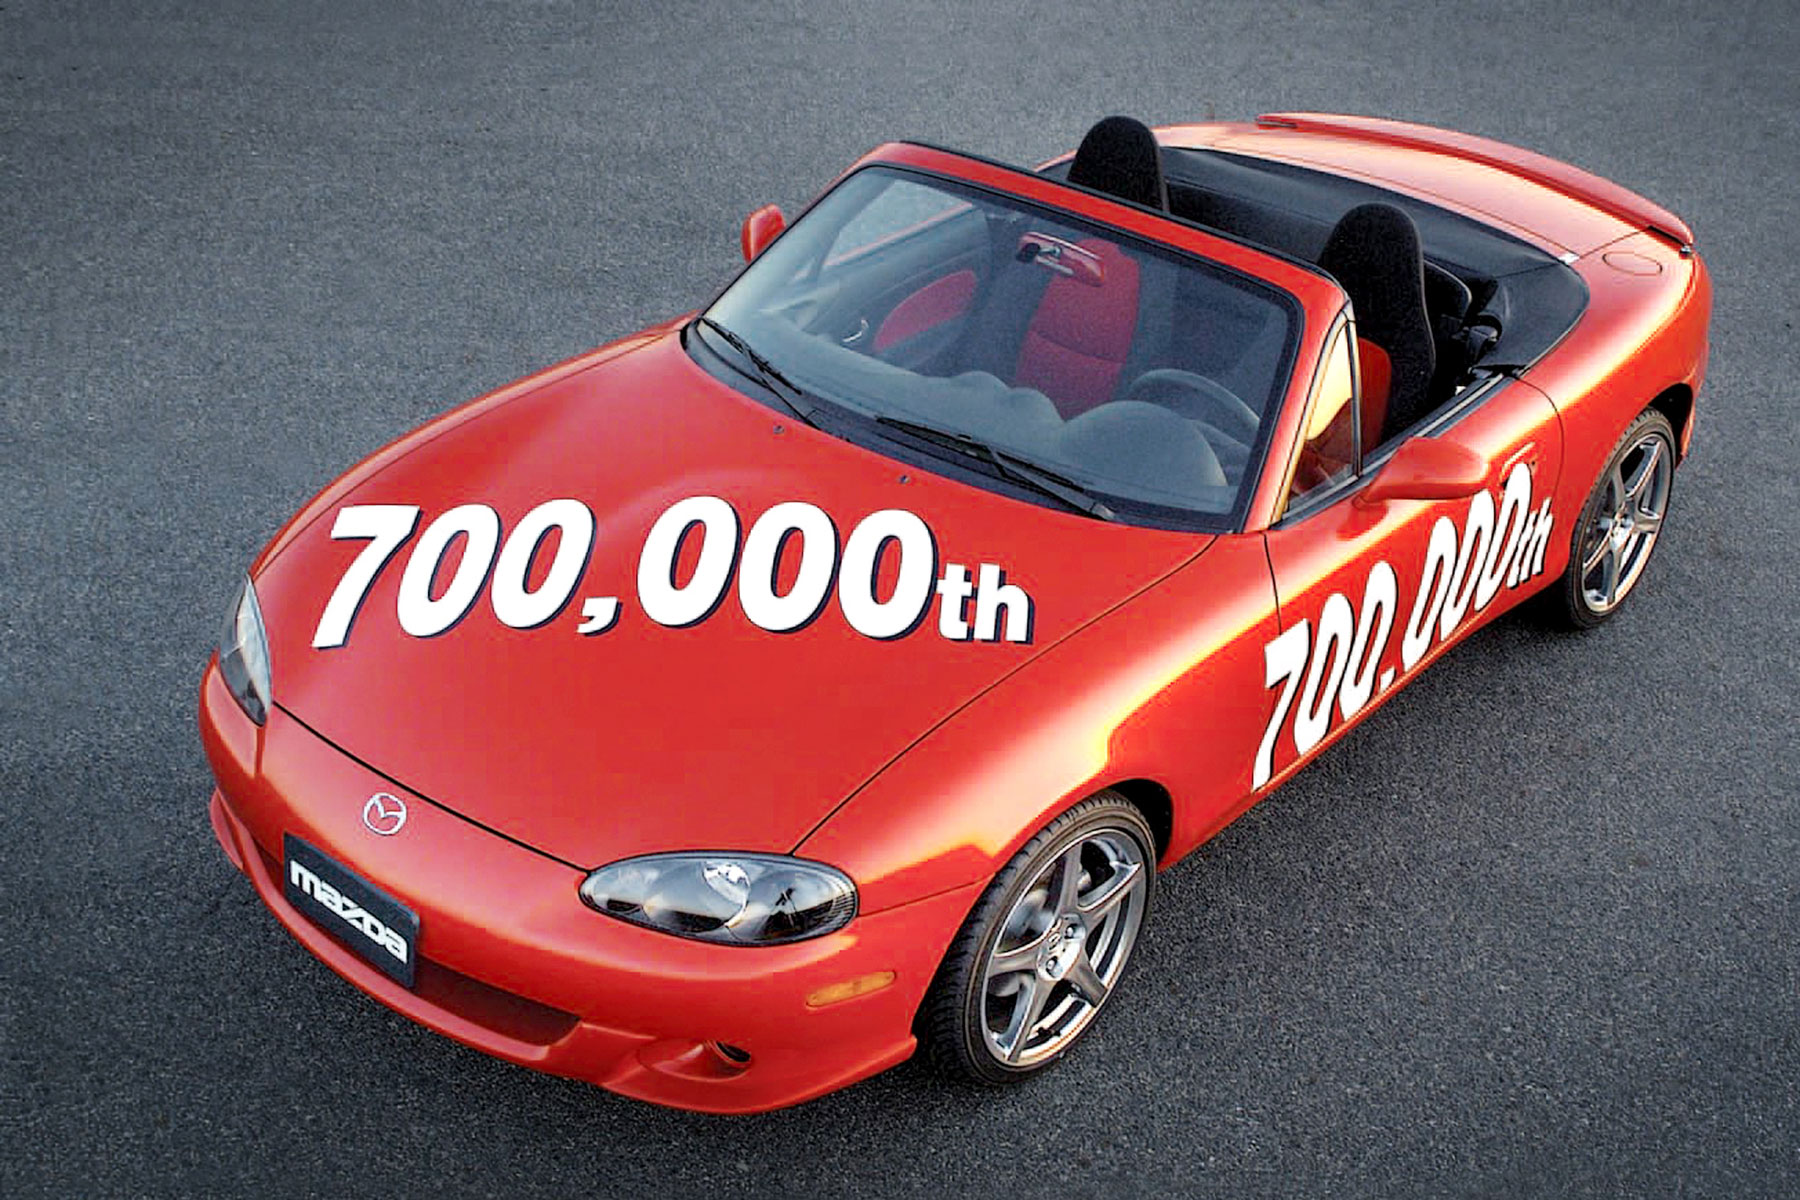 Best-selling sports car in history